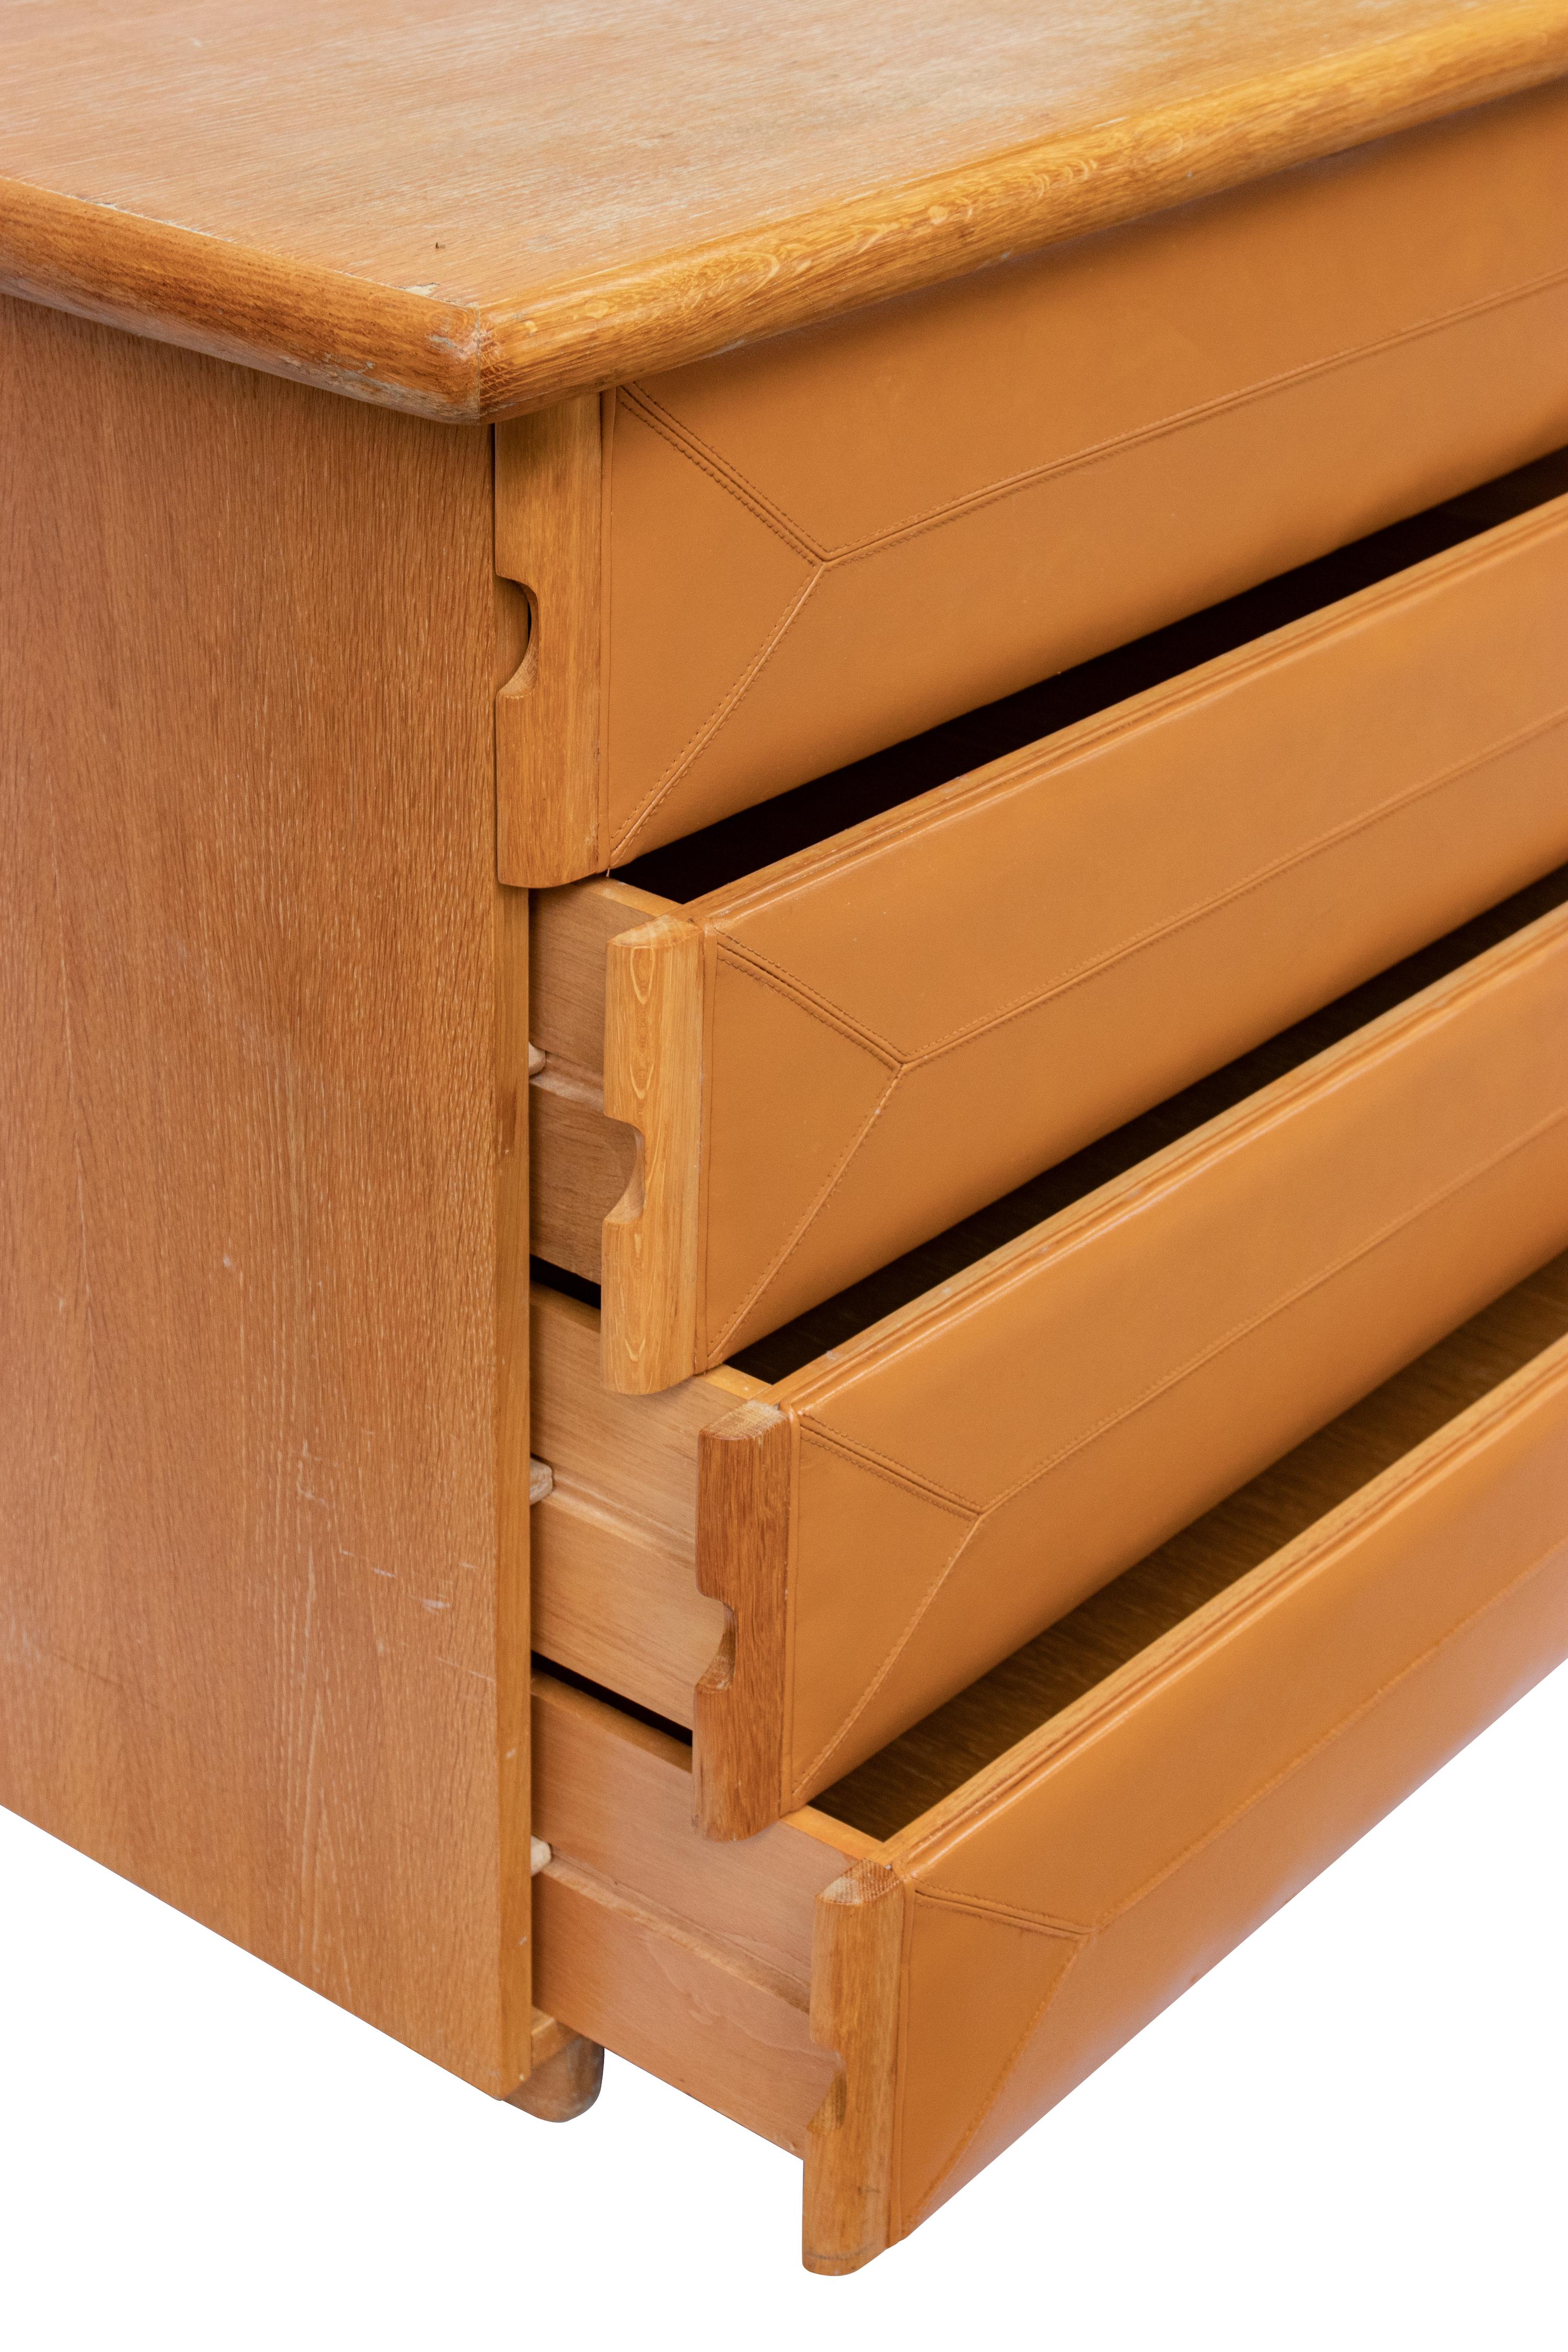 Leather Vintage Chest of drawers  Attr. to Poltrona Frau, Italy 1970s. For Sale